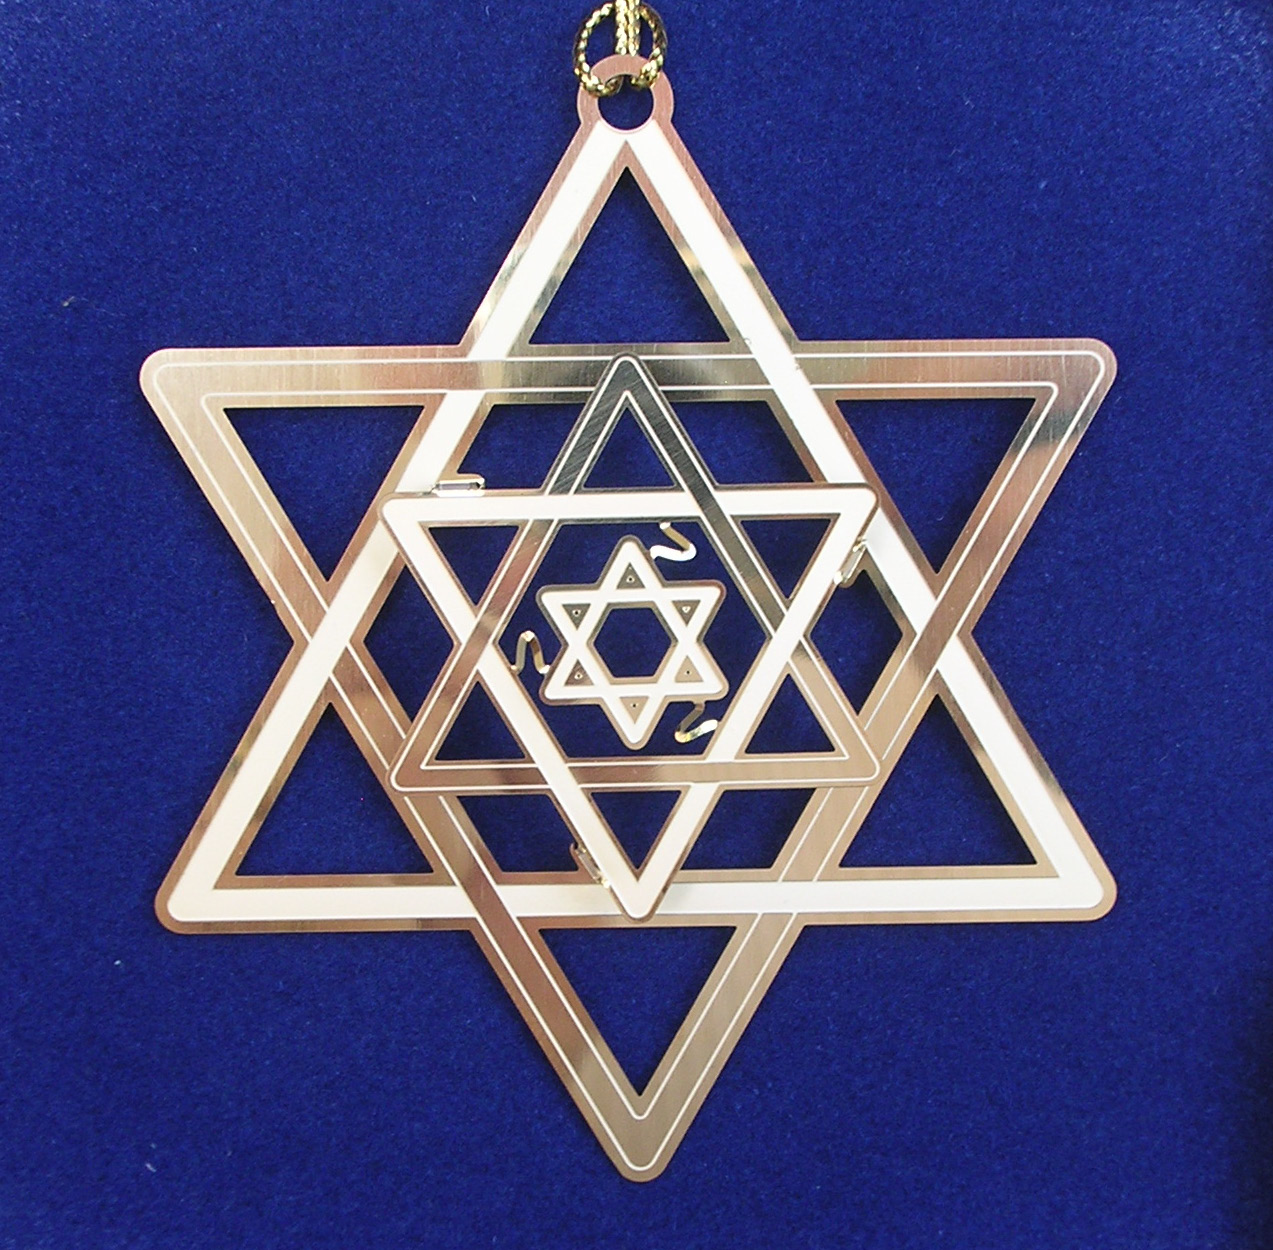 i am the maori star of david for world peace - Why Would the Anti-Defamation League Honor Rupert Murdoch?